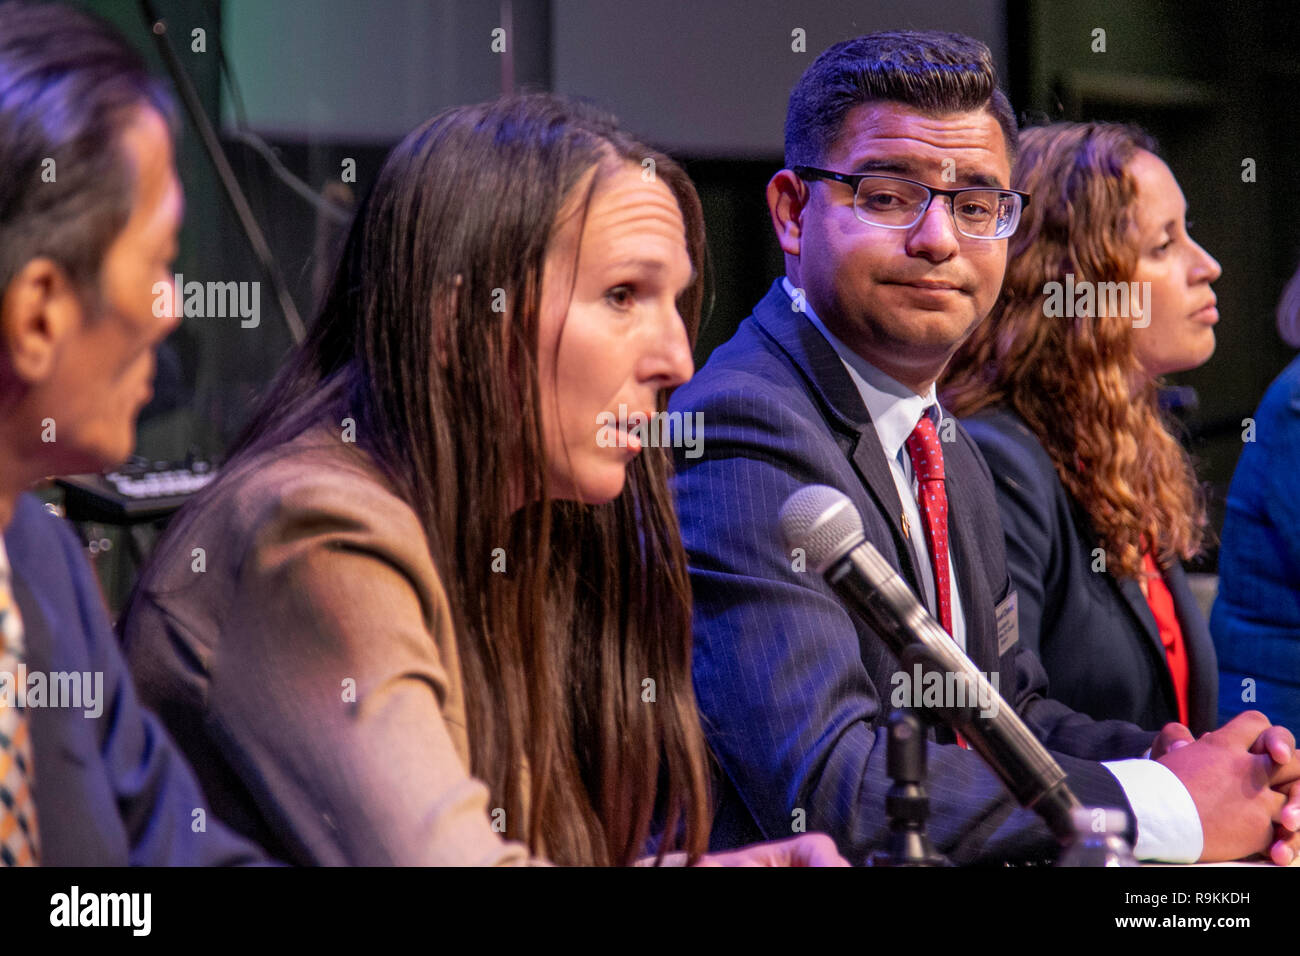 A Costa Mesa, CA, city council candidate gives a look of disbelief at a female competitor at a pre election candidates forum. Stock Photo